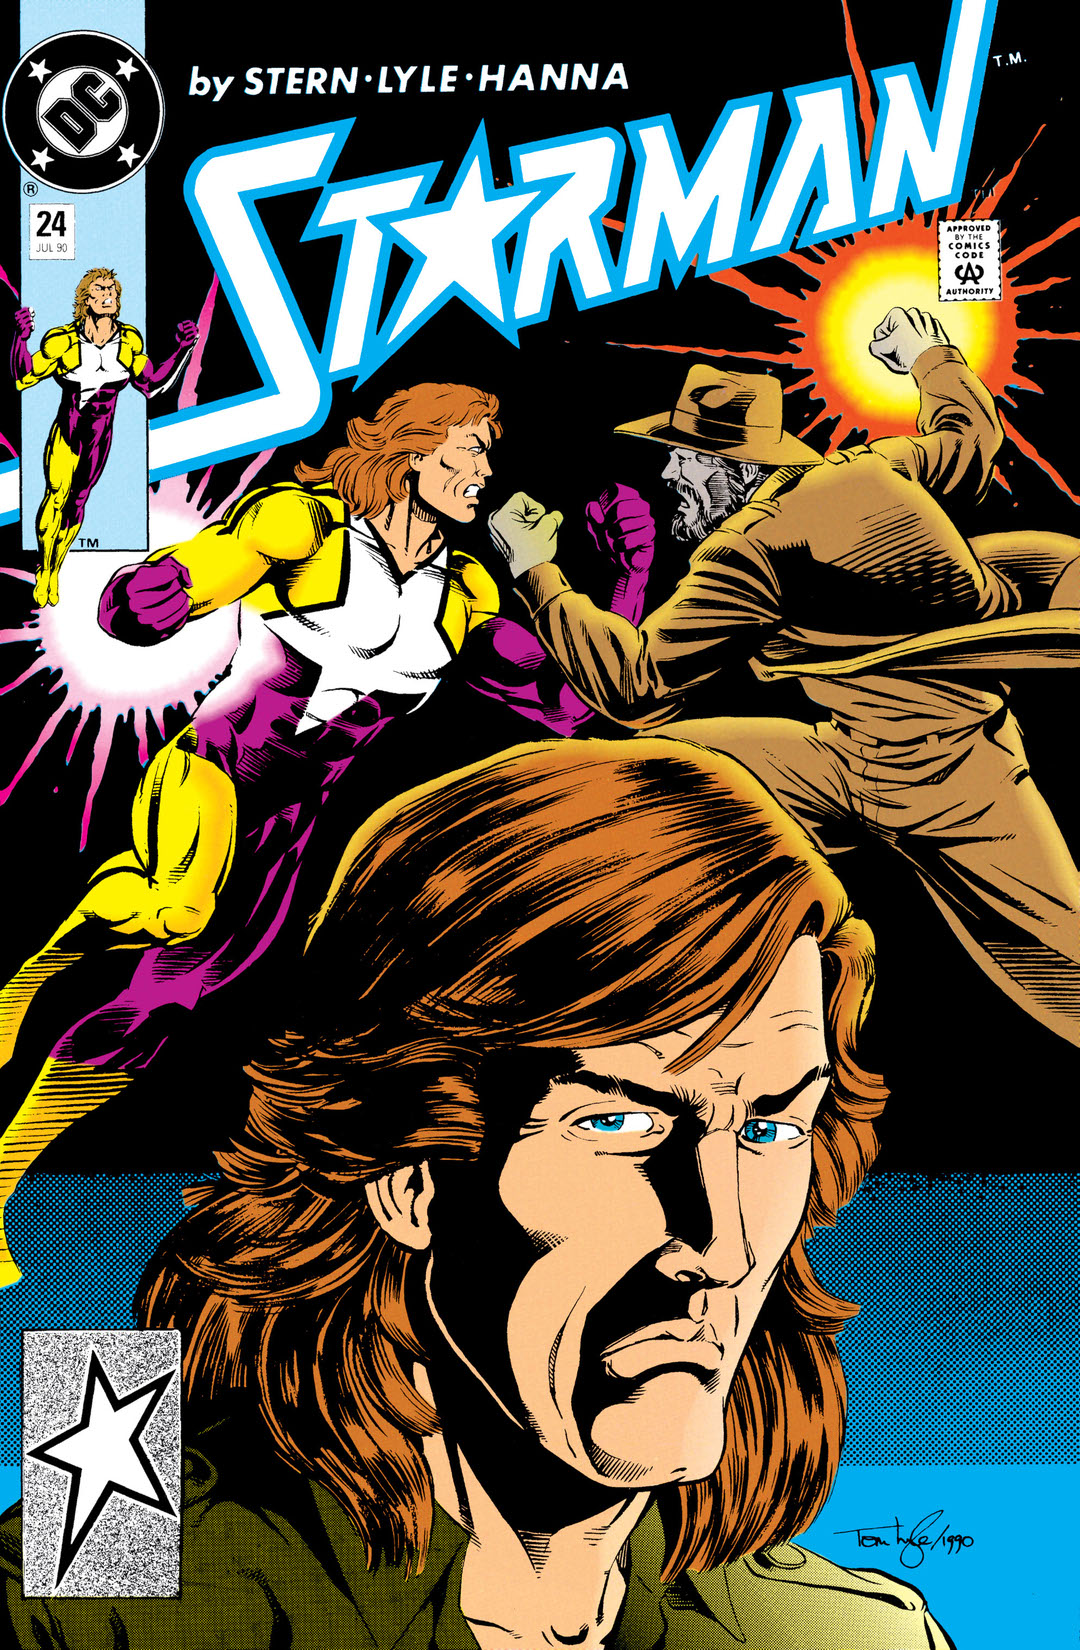 Starman (1988-) #24 preview images